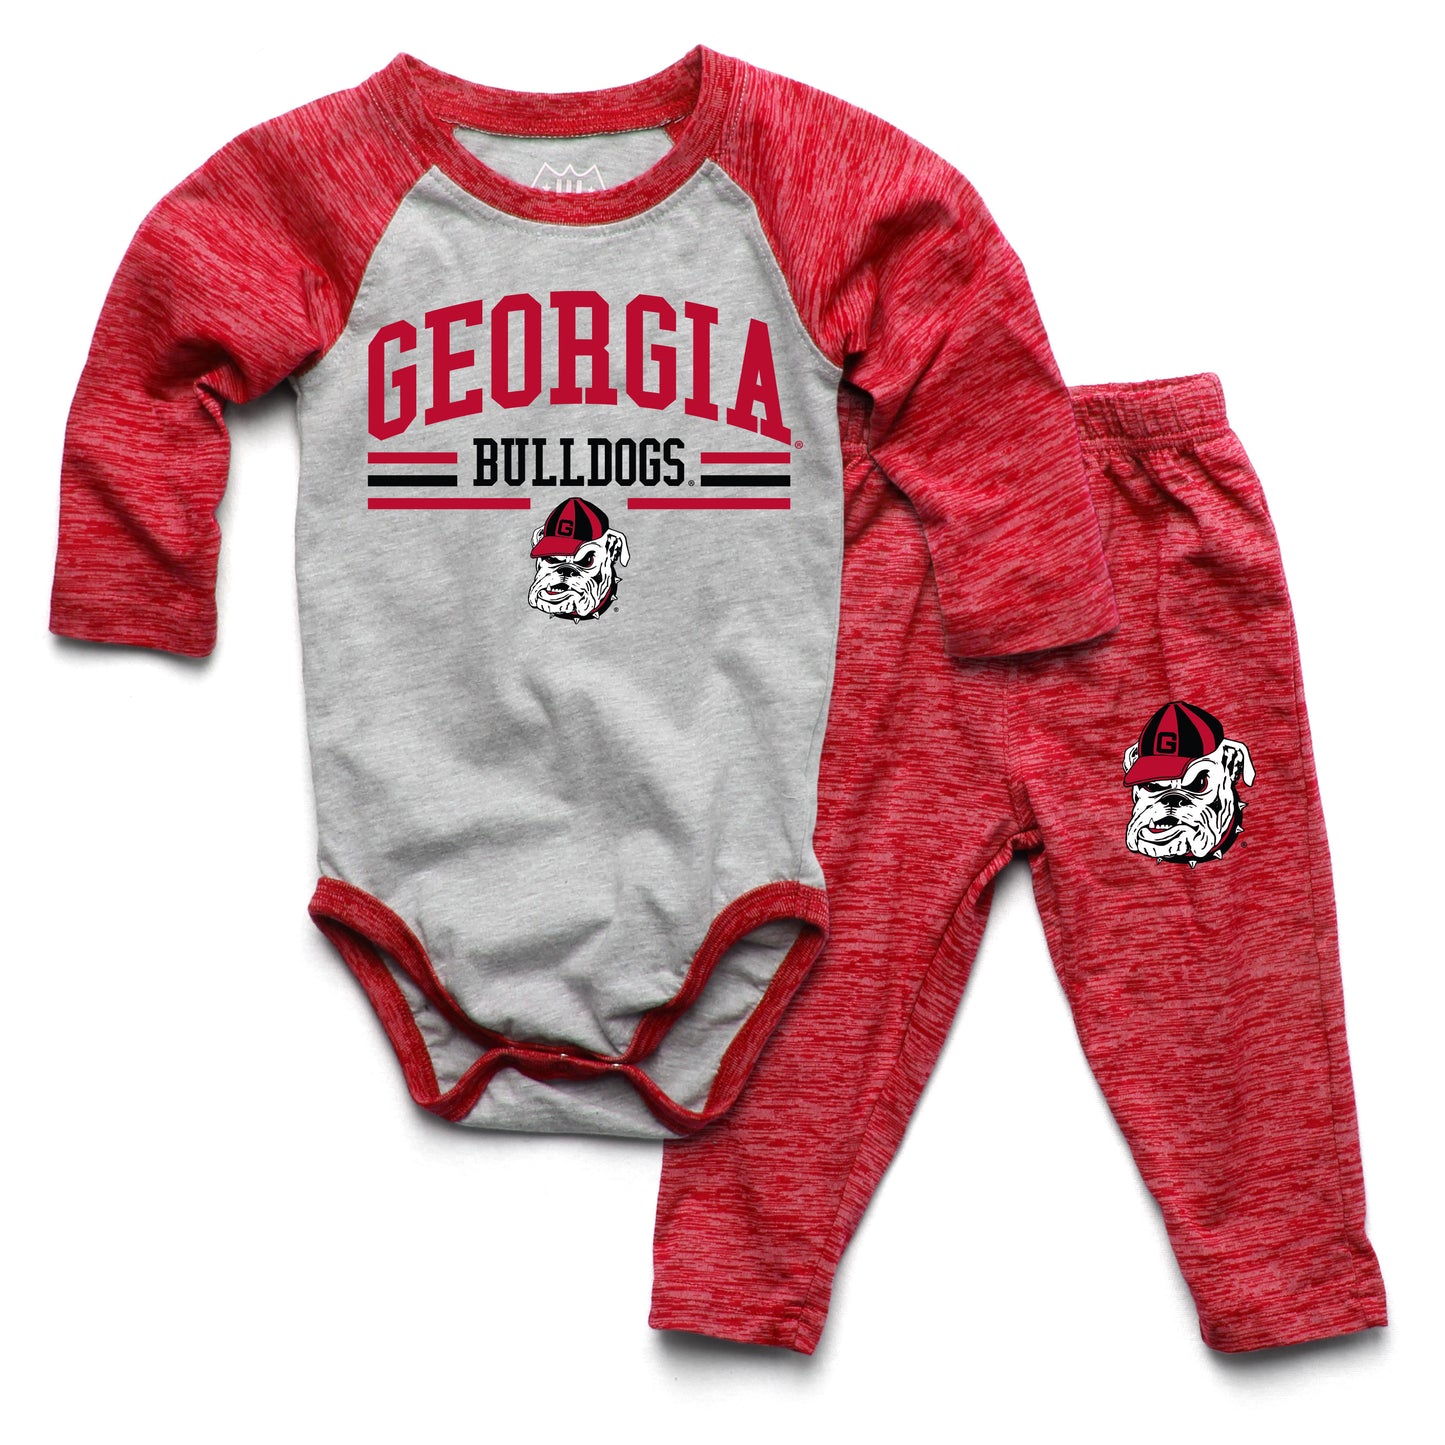 Georgia Bulldogs Wes and Willy Baby College Team Hopper and Pant Set Red